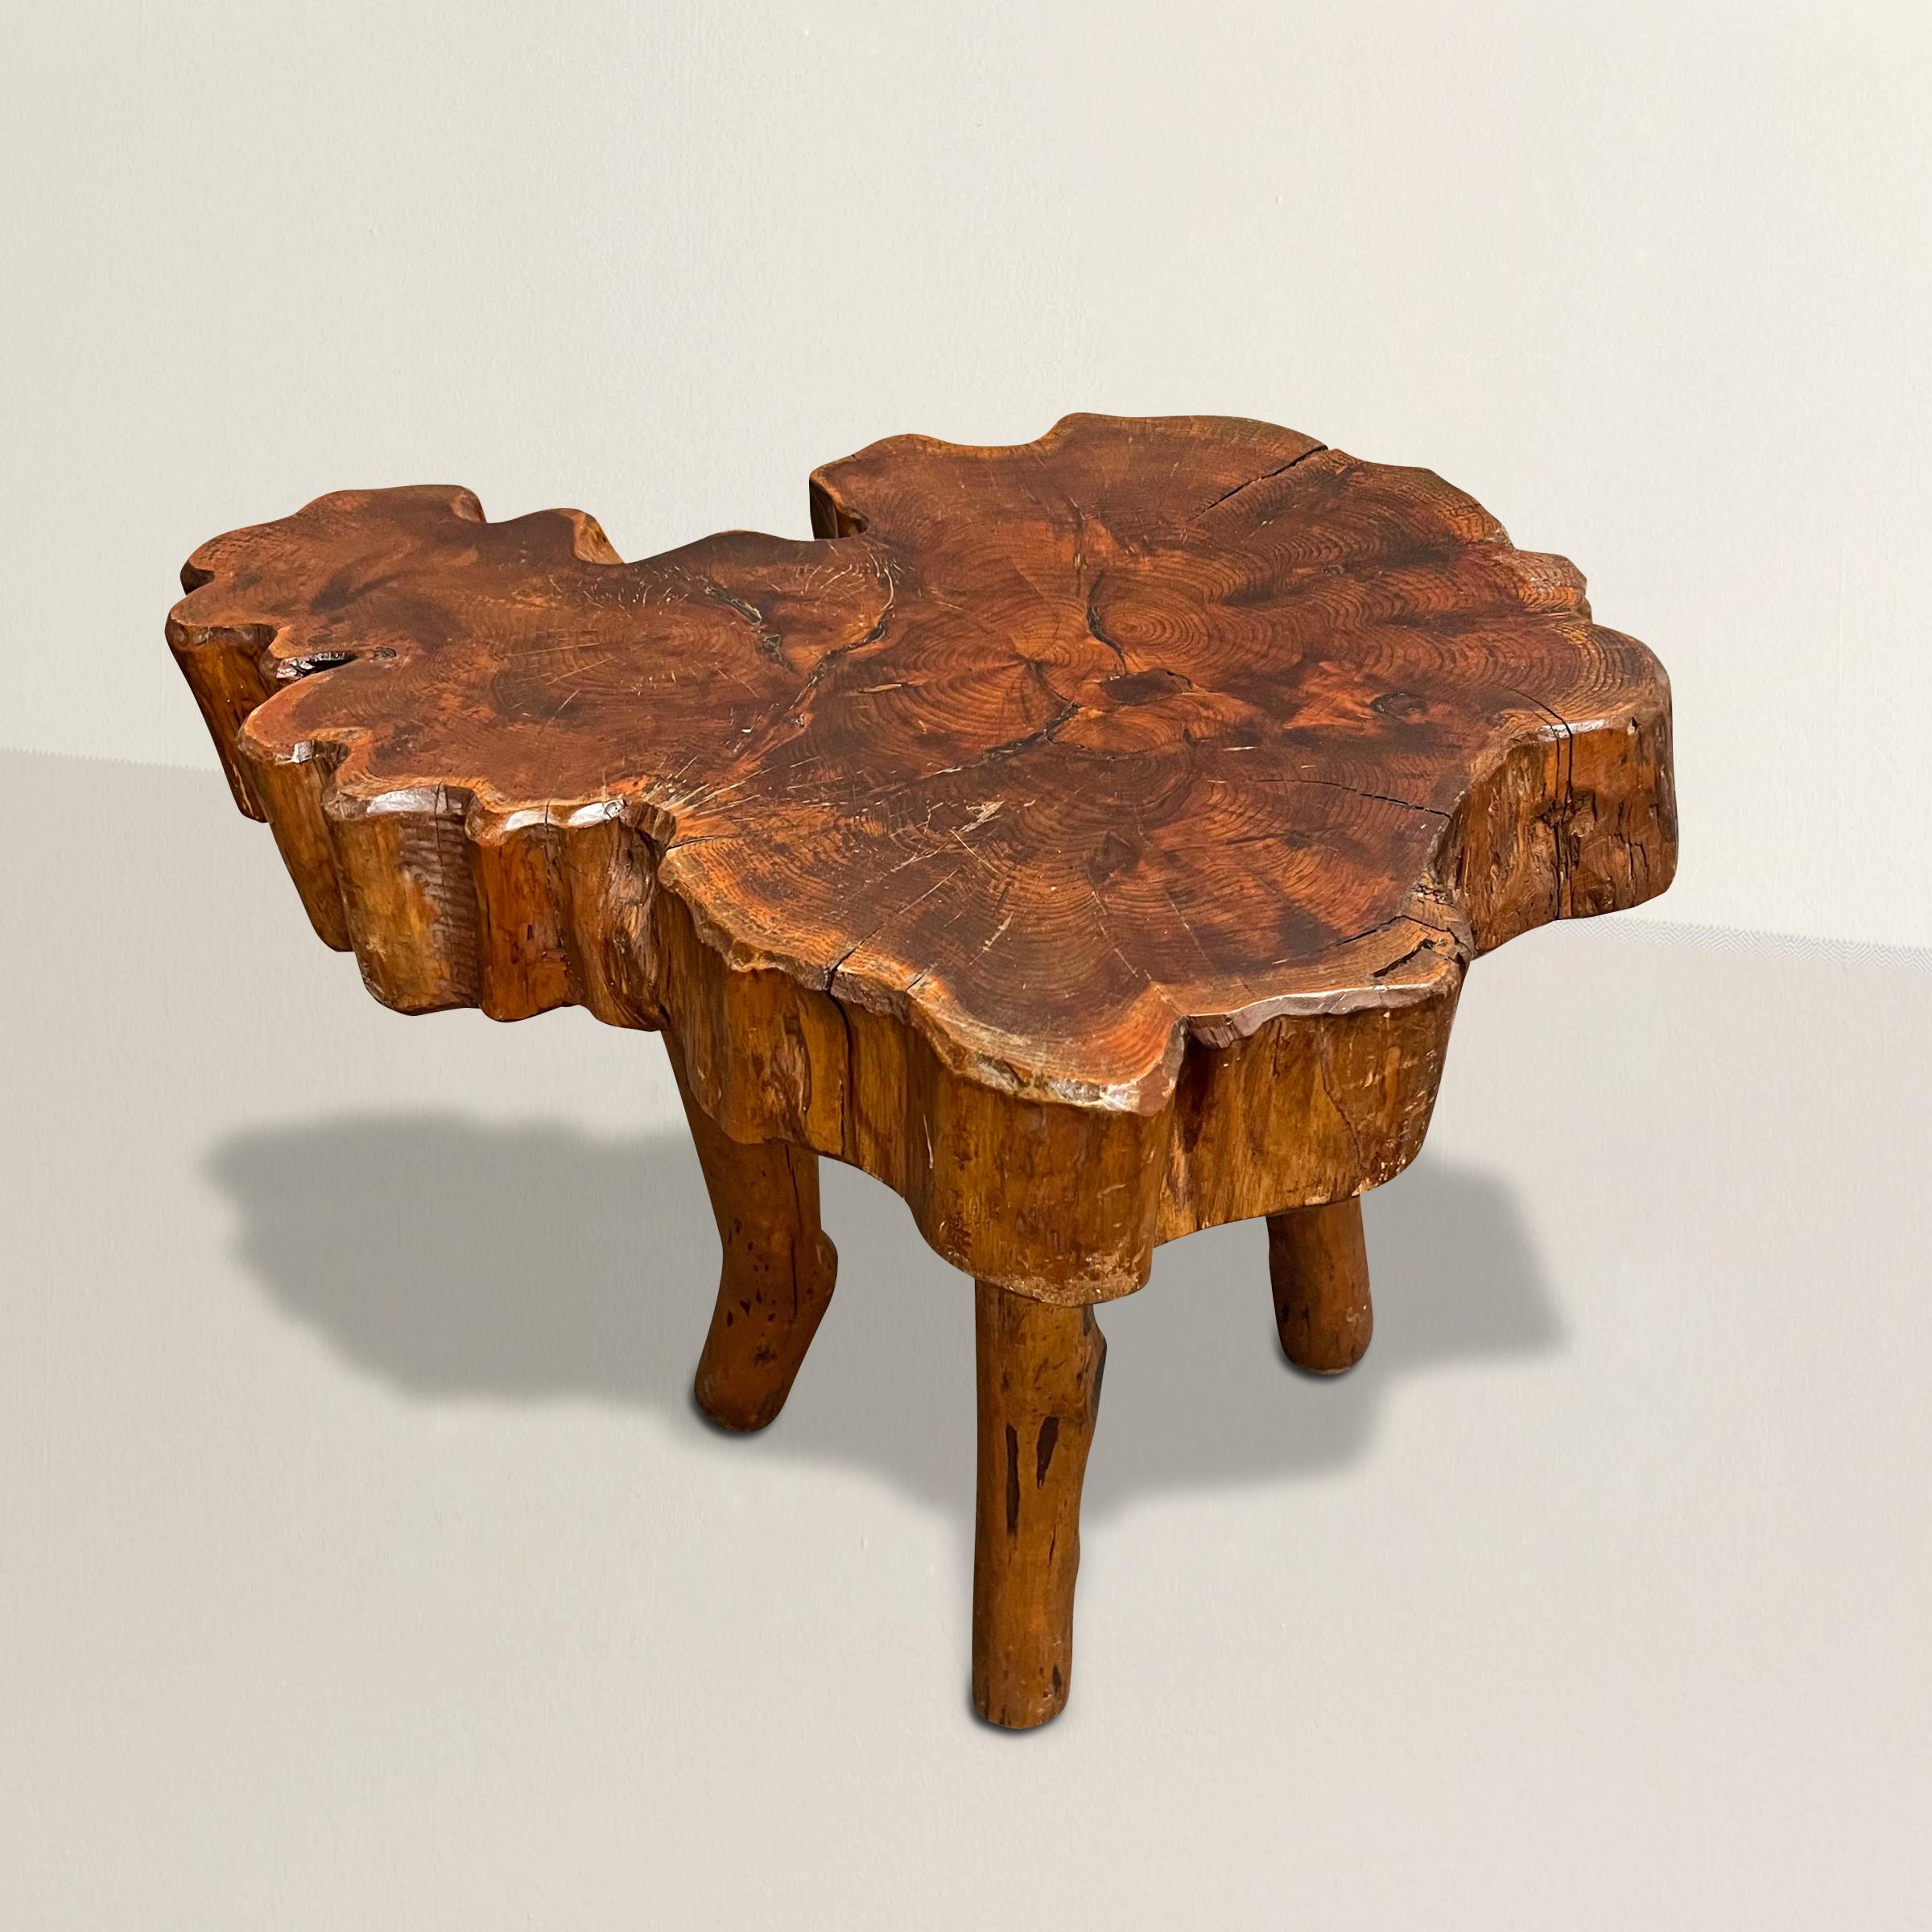 Immerse yourself in the harmonious blend of nature and modern design with this captivating French modernist live-edge table. Crafted from a remarkable slab section of burl wood, the table showcases the exquisite beauty of the natural world. Its live